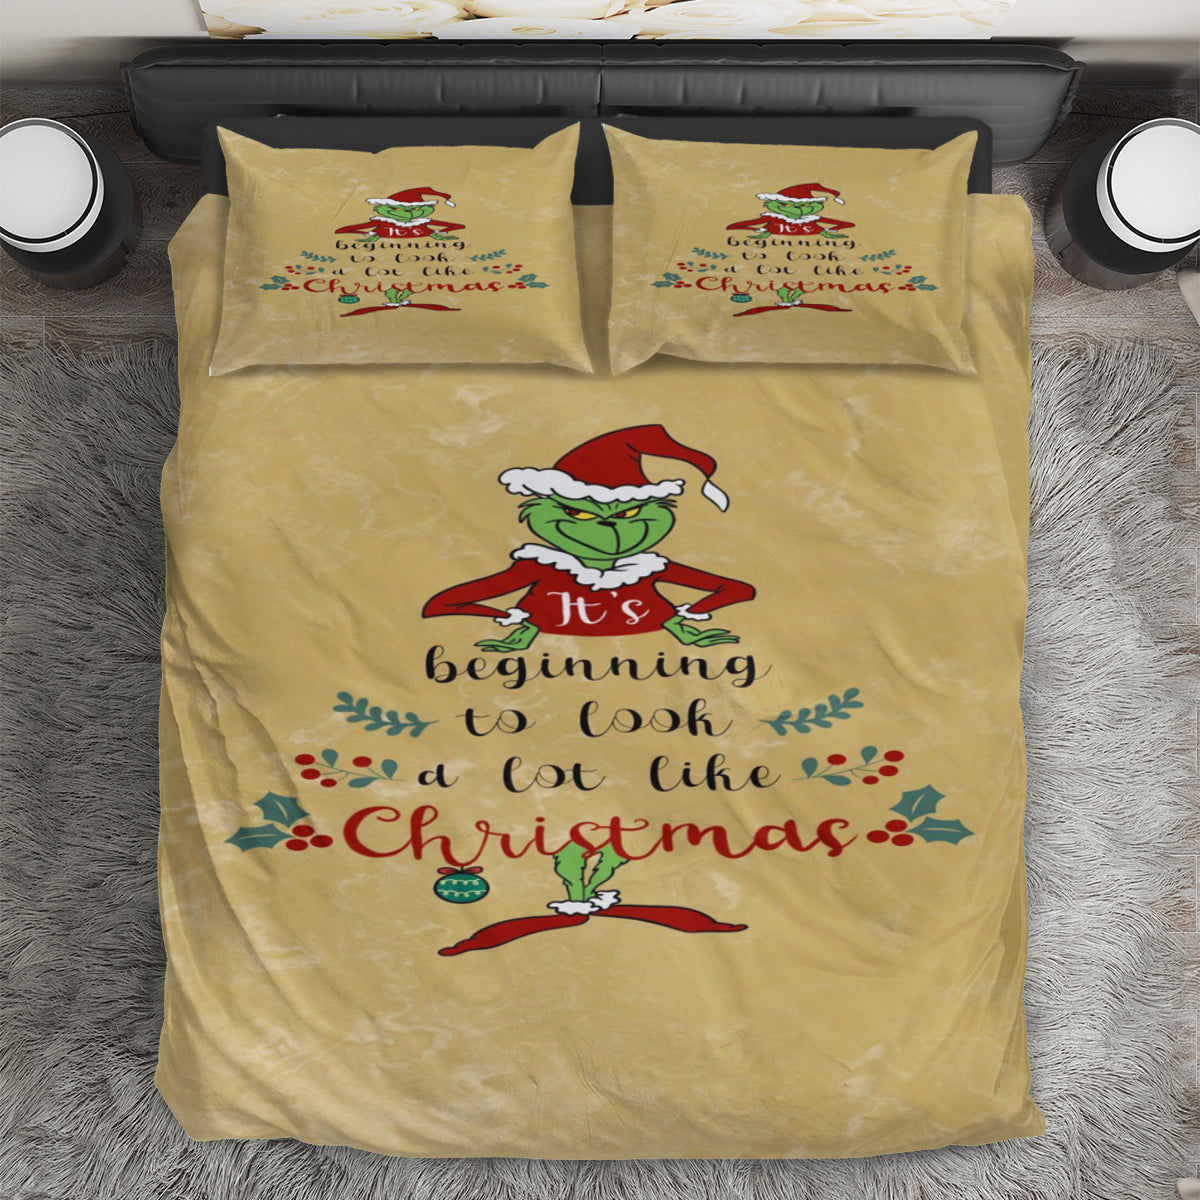 The Grinch Christmas It's Begining 3PCS Bedding Set Duvet Cover And Pillow Cases Gift For Fan